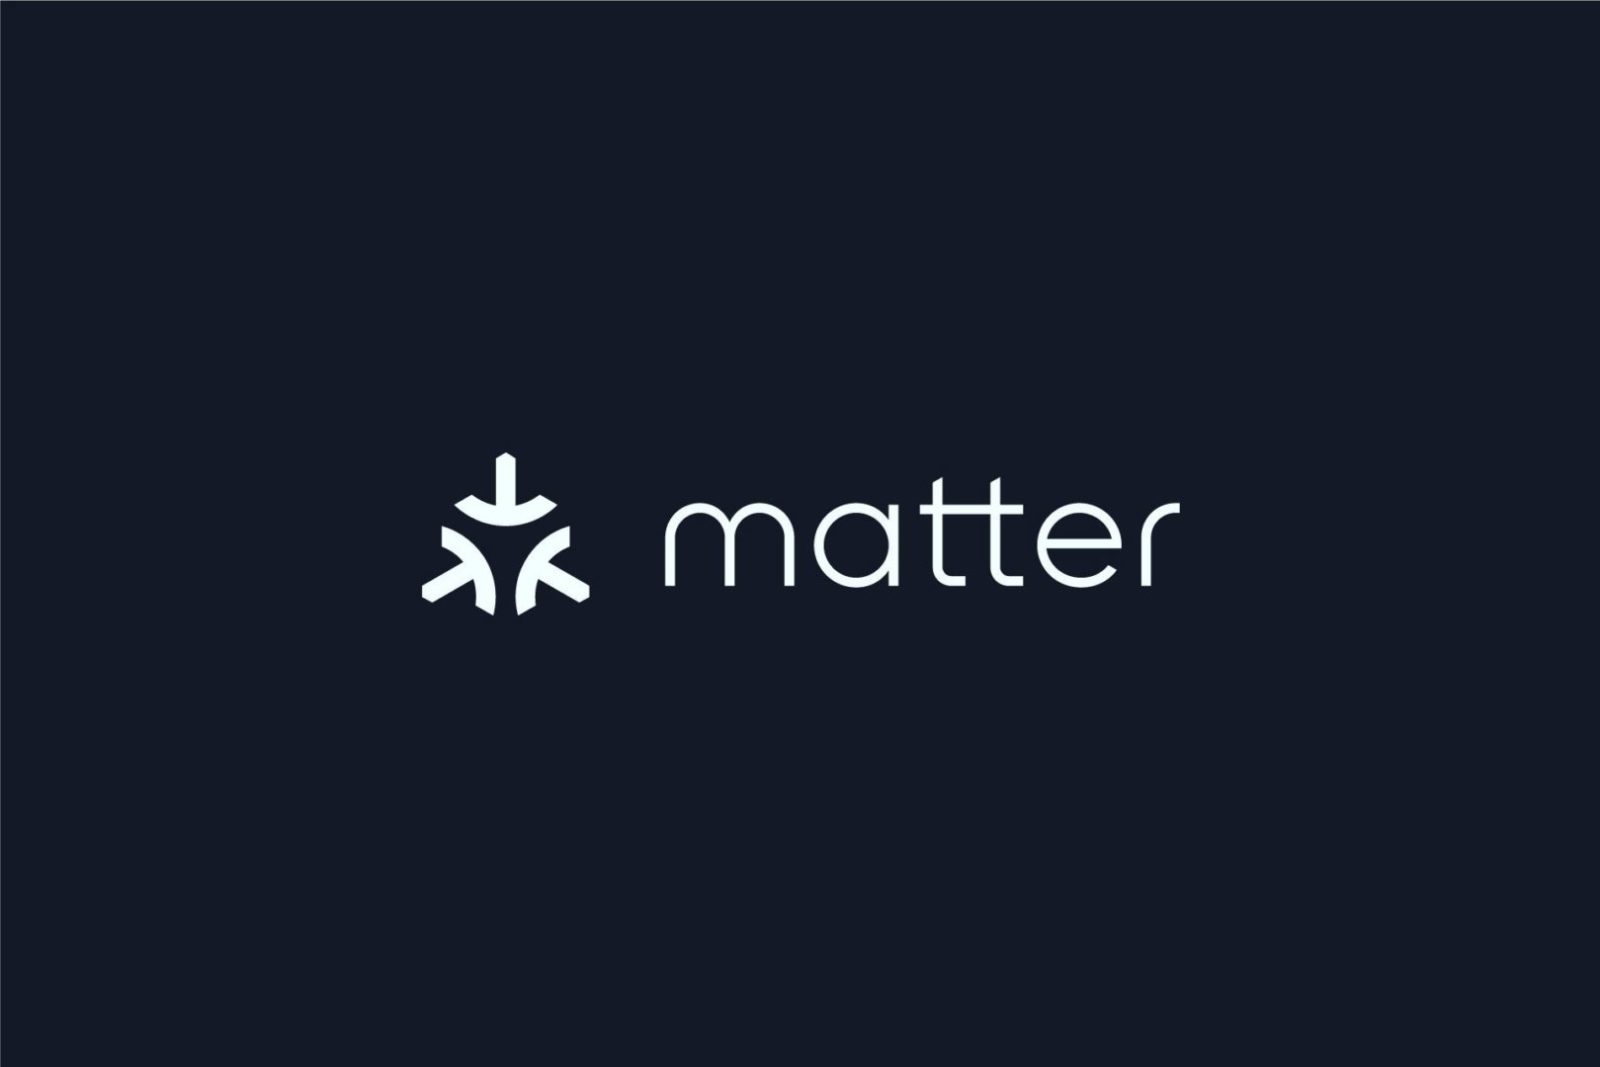 Matter is the new unifying platform of Project Connected Home over IP alliance